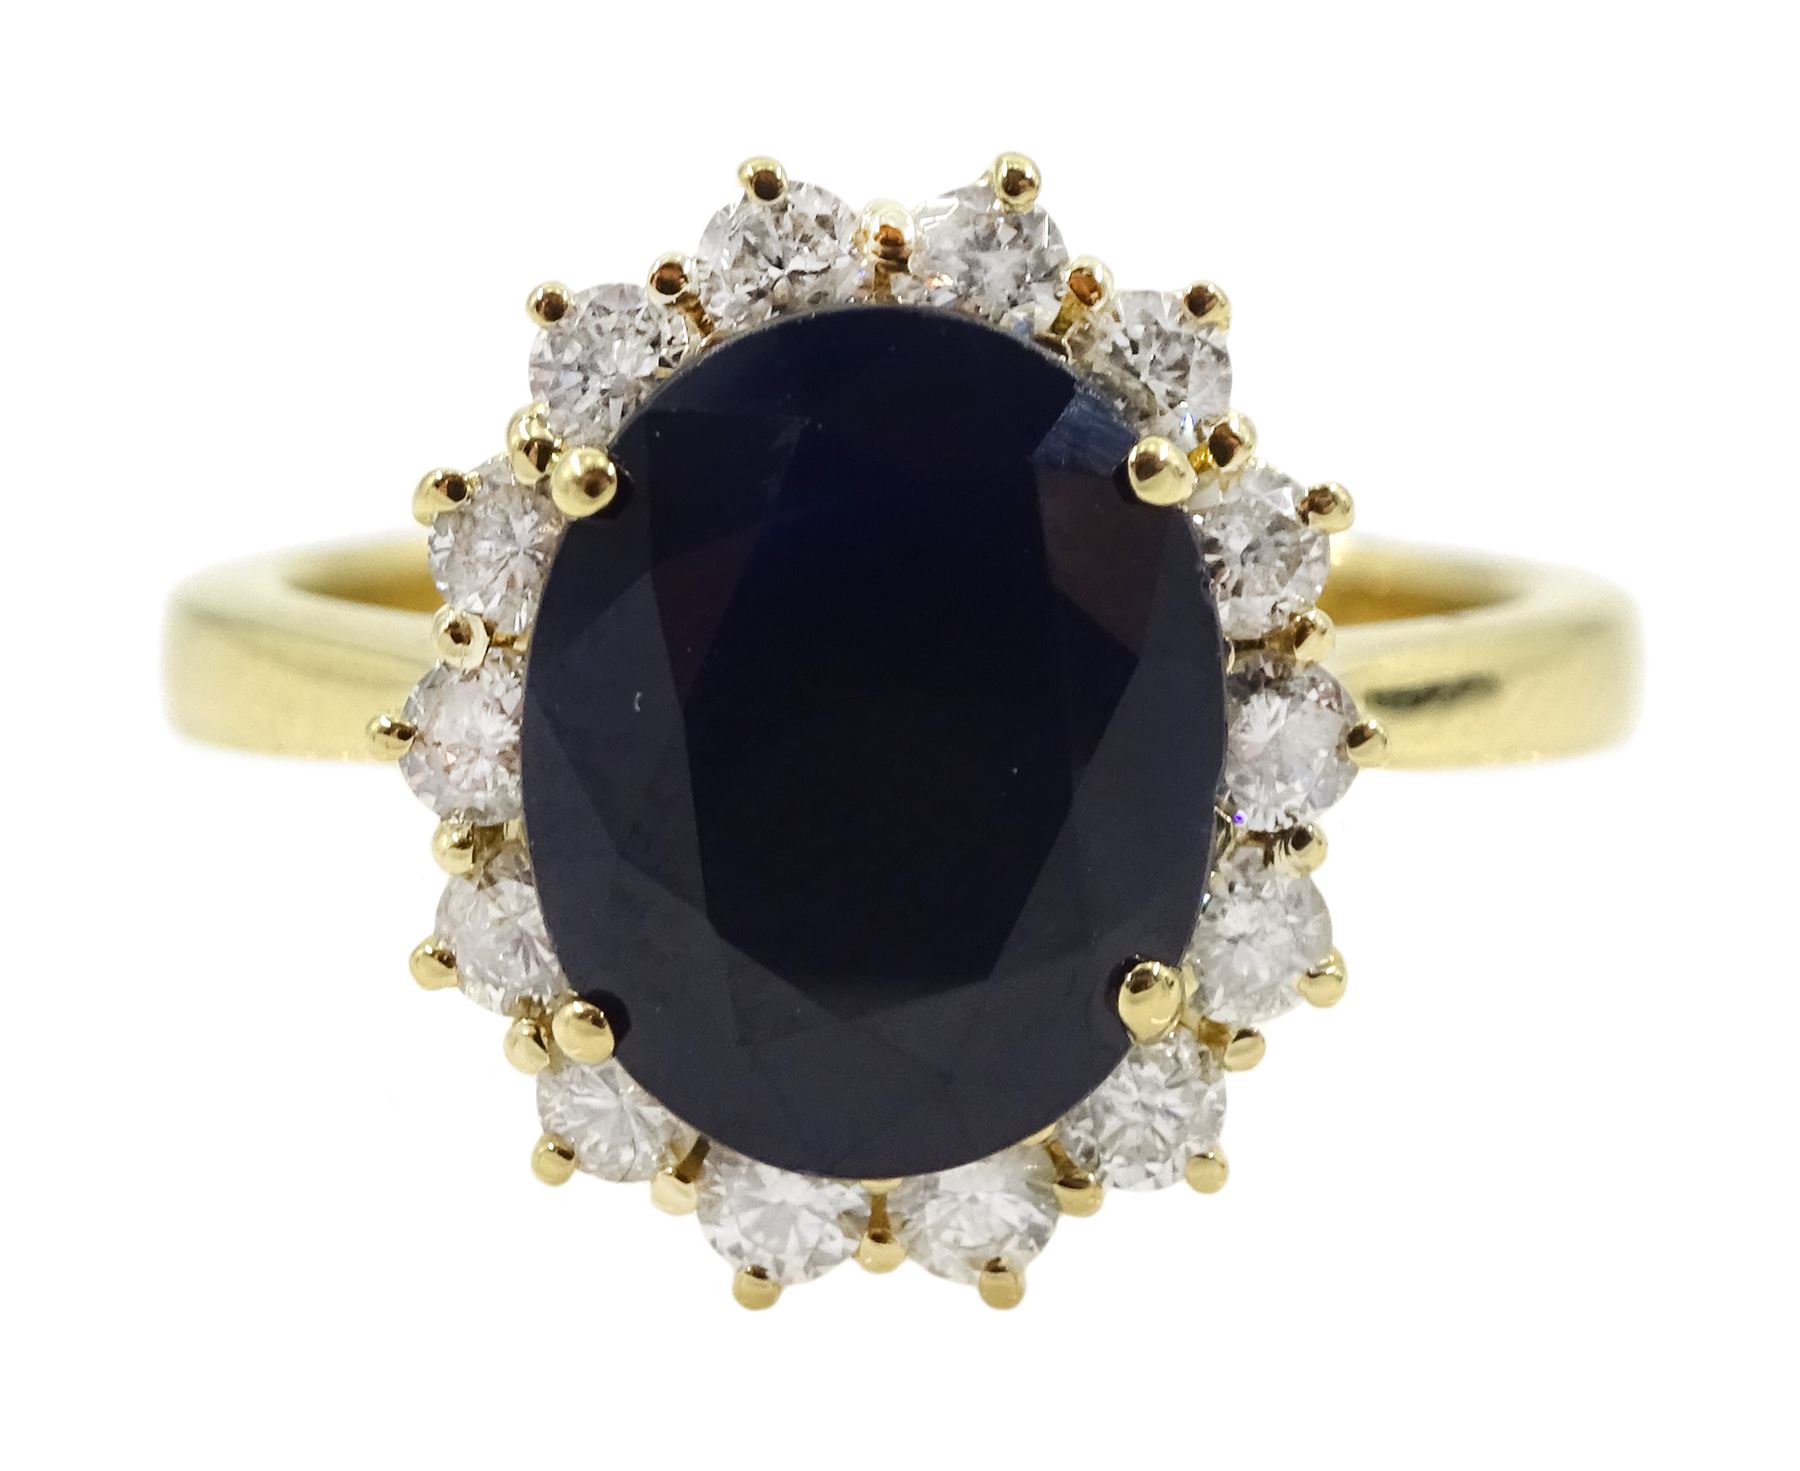 18ct gold oval sapphire and round brilliant cut diamond cluster ring